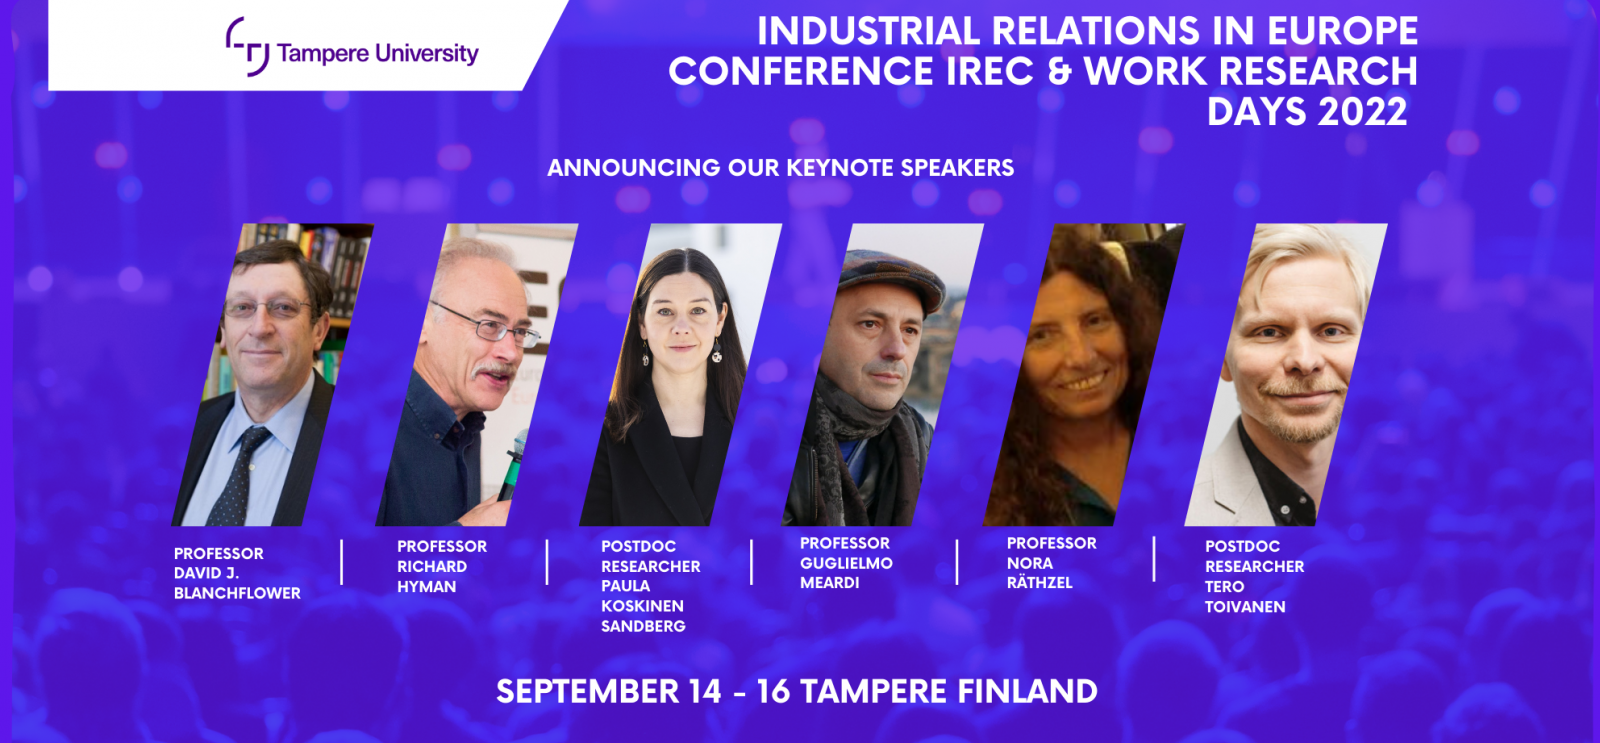 The Industrial Relations in Europe Conference (IREC) and the Work Research Days 2022 will take place between 14 and 16 September at Tampere Finland. Our keynote speakers are professor David J. Blanchflower, professor Richard Hyman, postdoc researcher Paula Koskinen Sandberg, professor Guglielmo Meardi, professor Nora Räthzel and postdoc researcher Tero Toivanen.